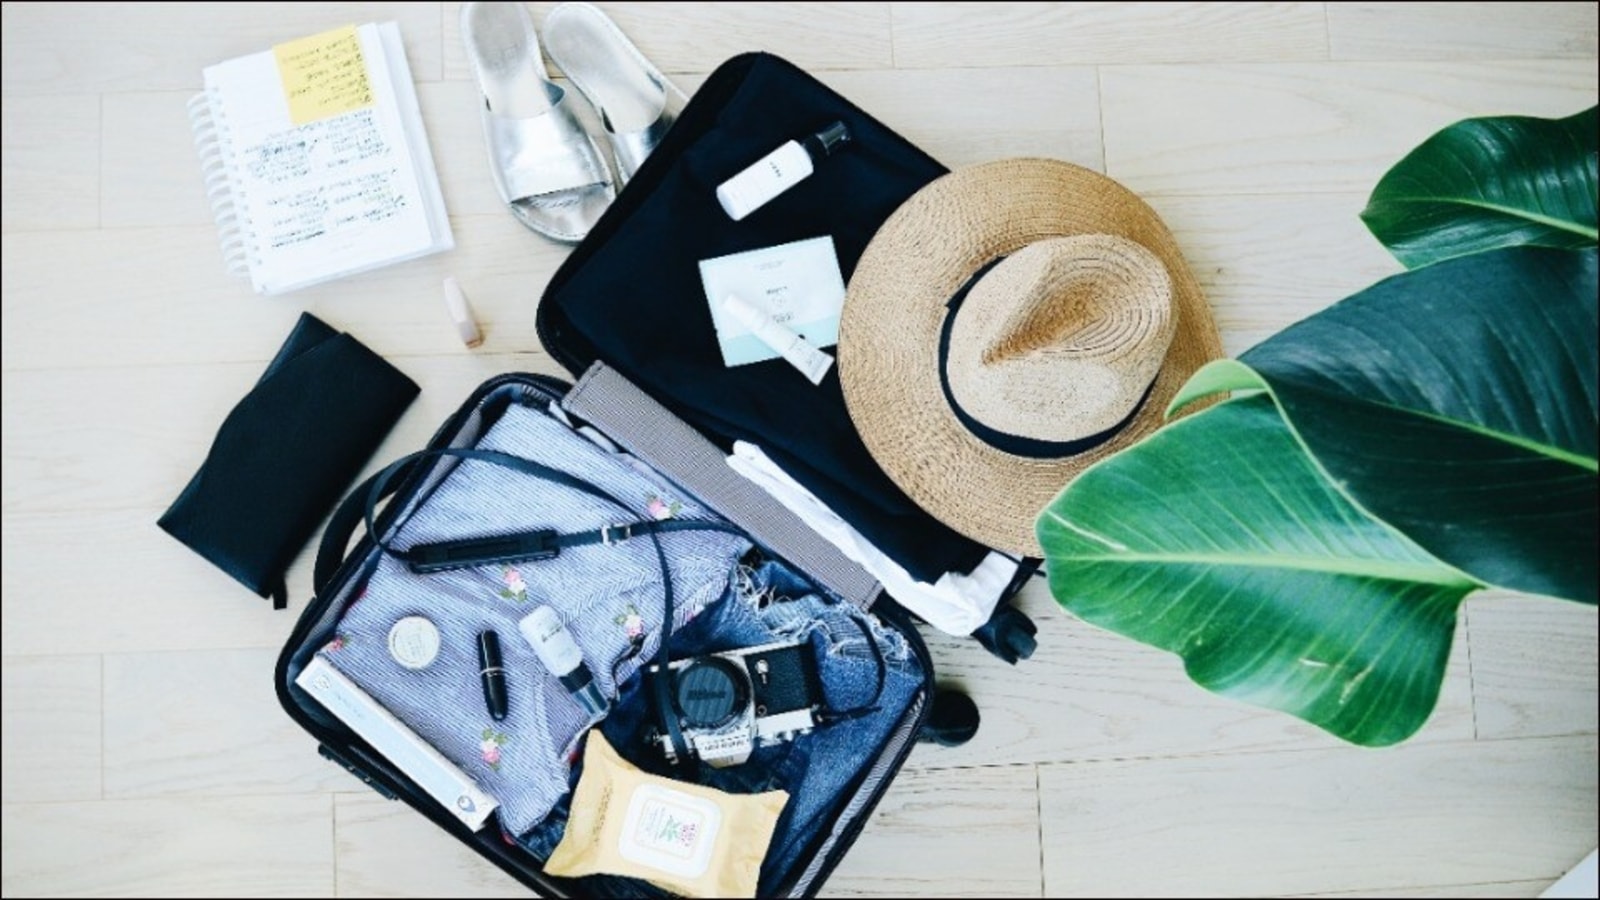 Travelling this summer? Check this holiday packing list with vacation must-haves | Travel